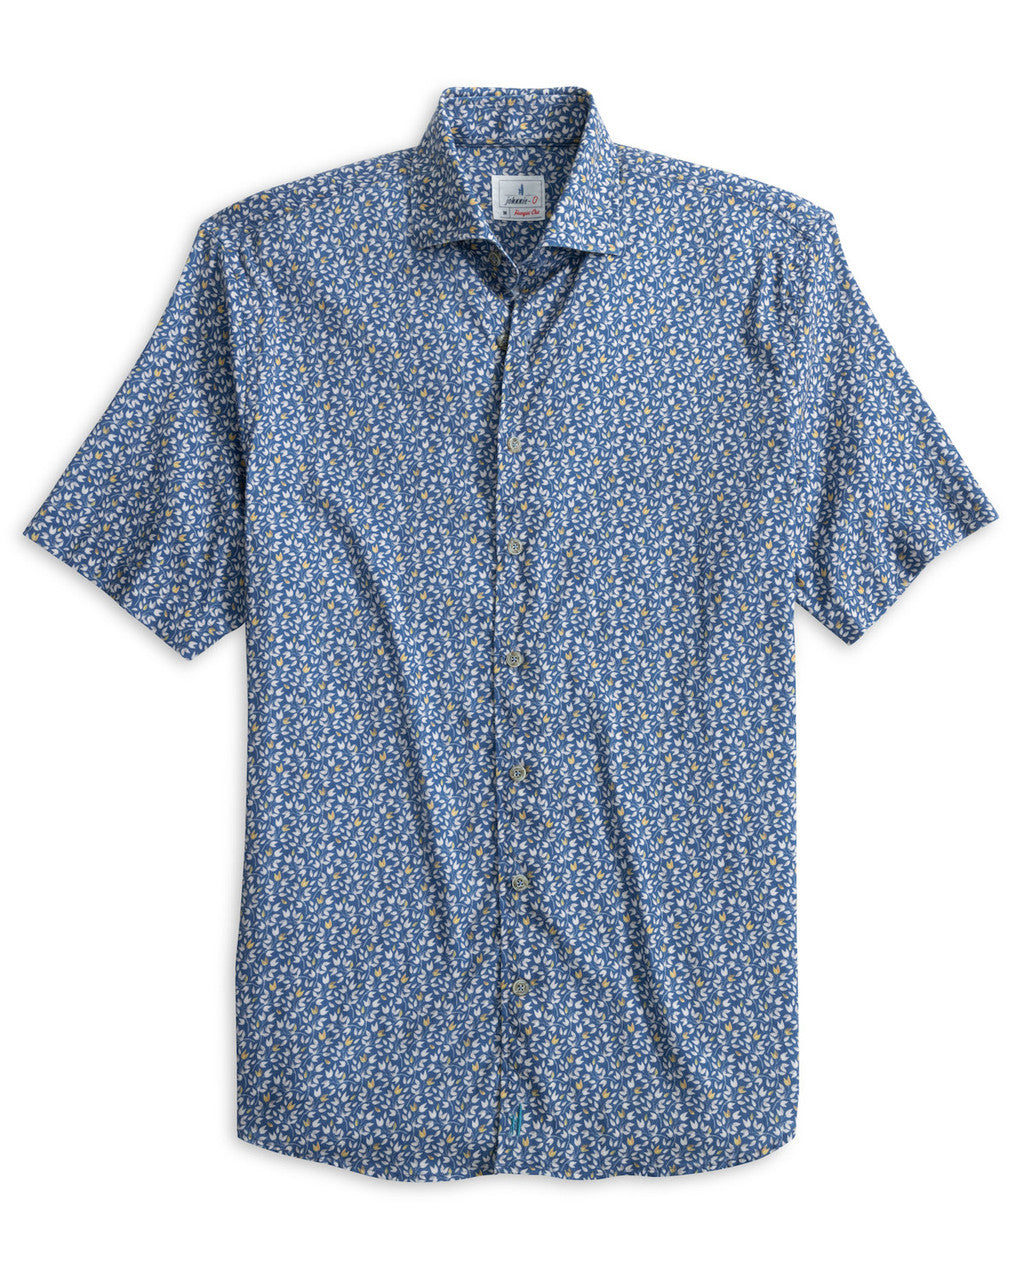 Designed to sit untucked, this shirt is cut like a button-up but with the fabric of a polo so you can take some of that performance comfort and blend it with some jeans or board shorts. Drawn in-house, this clever flamingo print stands out...on one leg.